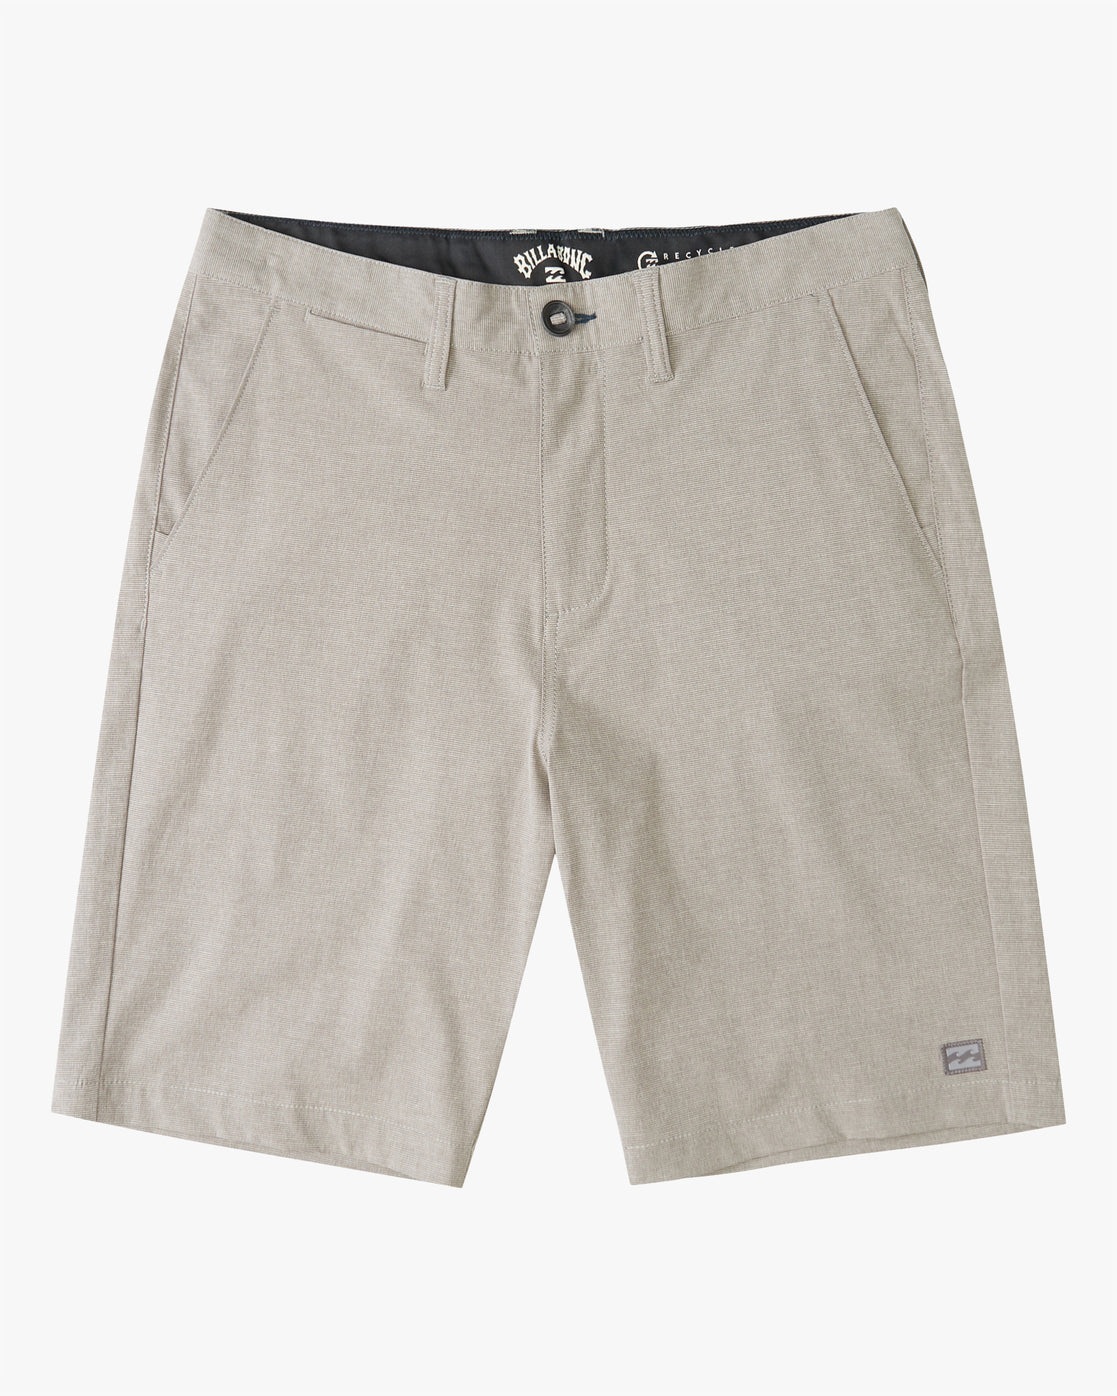 Crossfire Submersible Shorts 21" - Grey